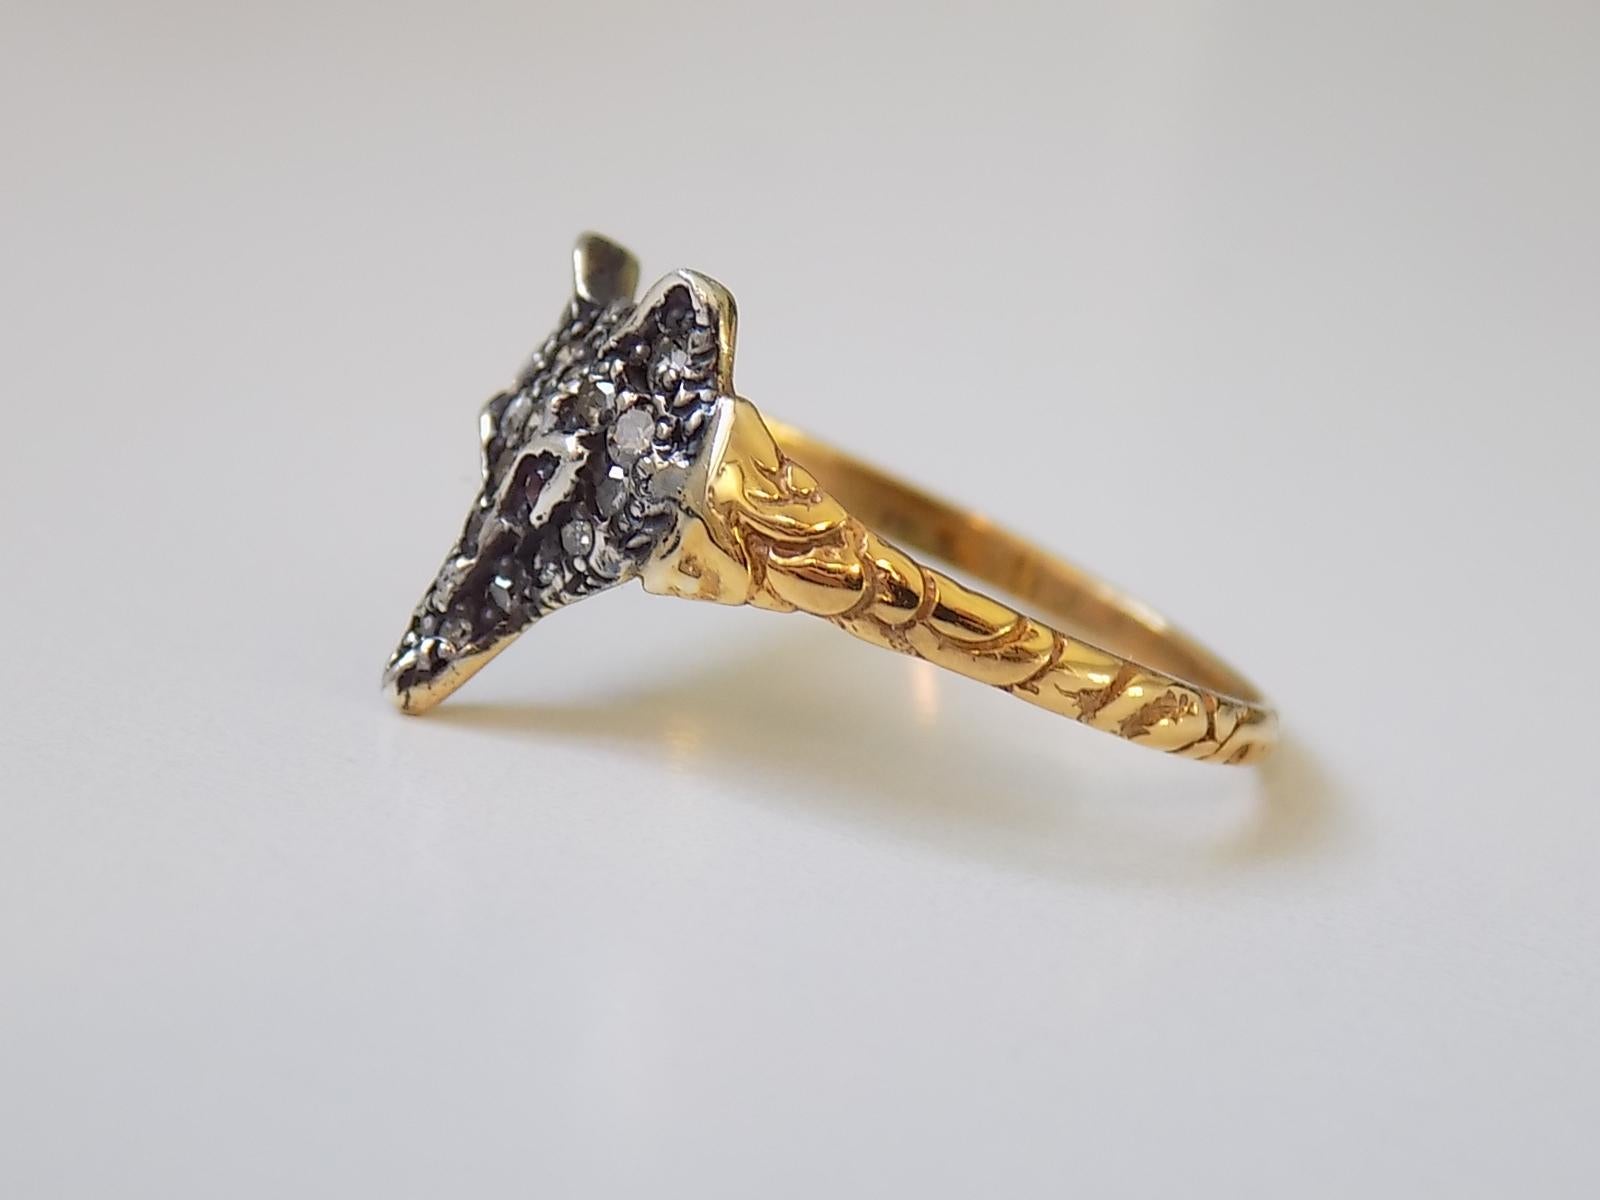 A Stunning Silver and Diamond Fox head ring on Yellow Gold shank. The ring made in Victorian style.
Size R UK, 9 US.
Height of the face 13mm, Width 11mm.
Weight 2.0gr.
Unmarked.
Excellent condition and ready to wear.